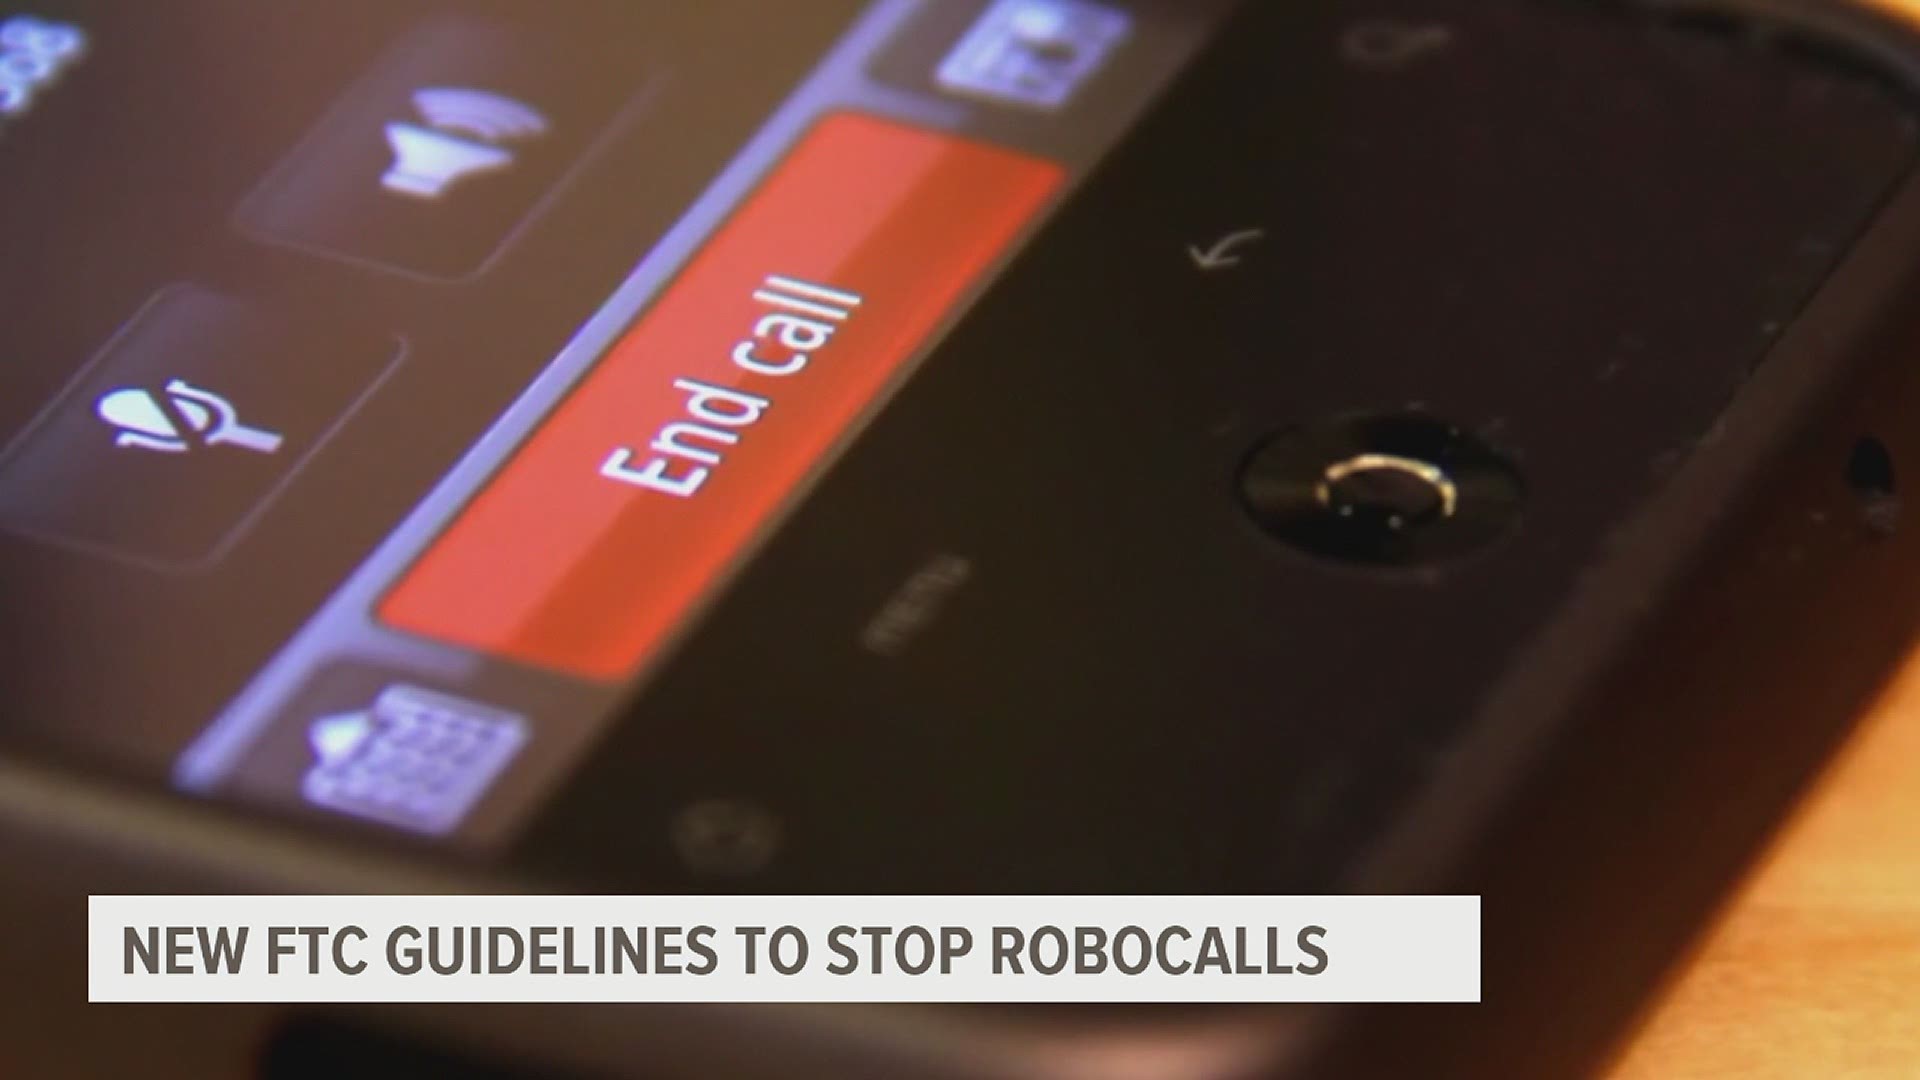 The deadline for major phone companies to implement technology to help stop robocalls begins today